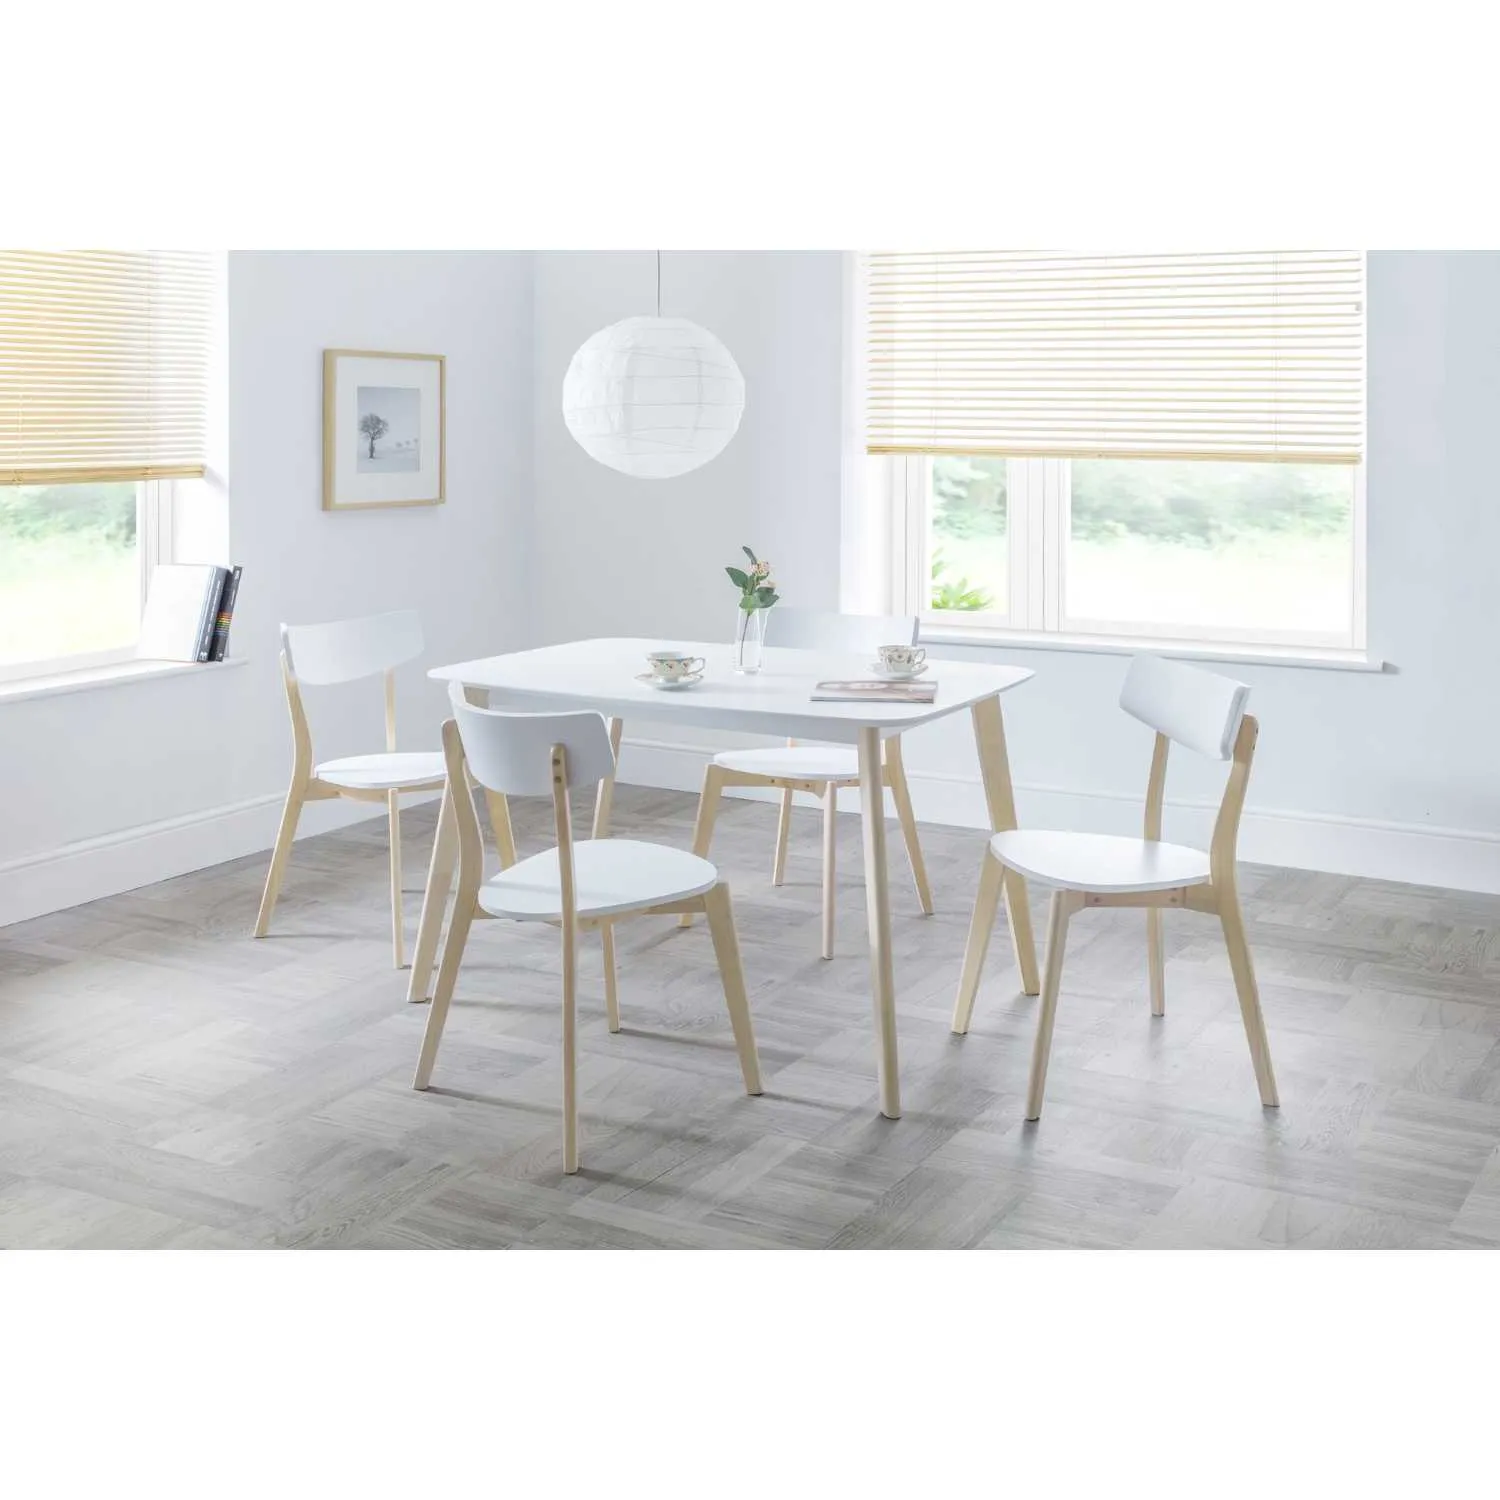 White Lacquered Top Limed Oak Legs 120cm Small Rectangular 4 Seater Kitchen Dining Table